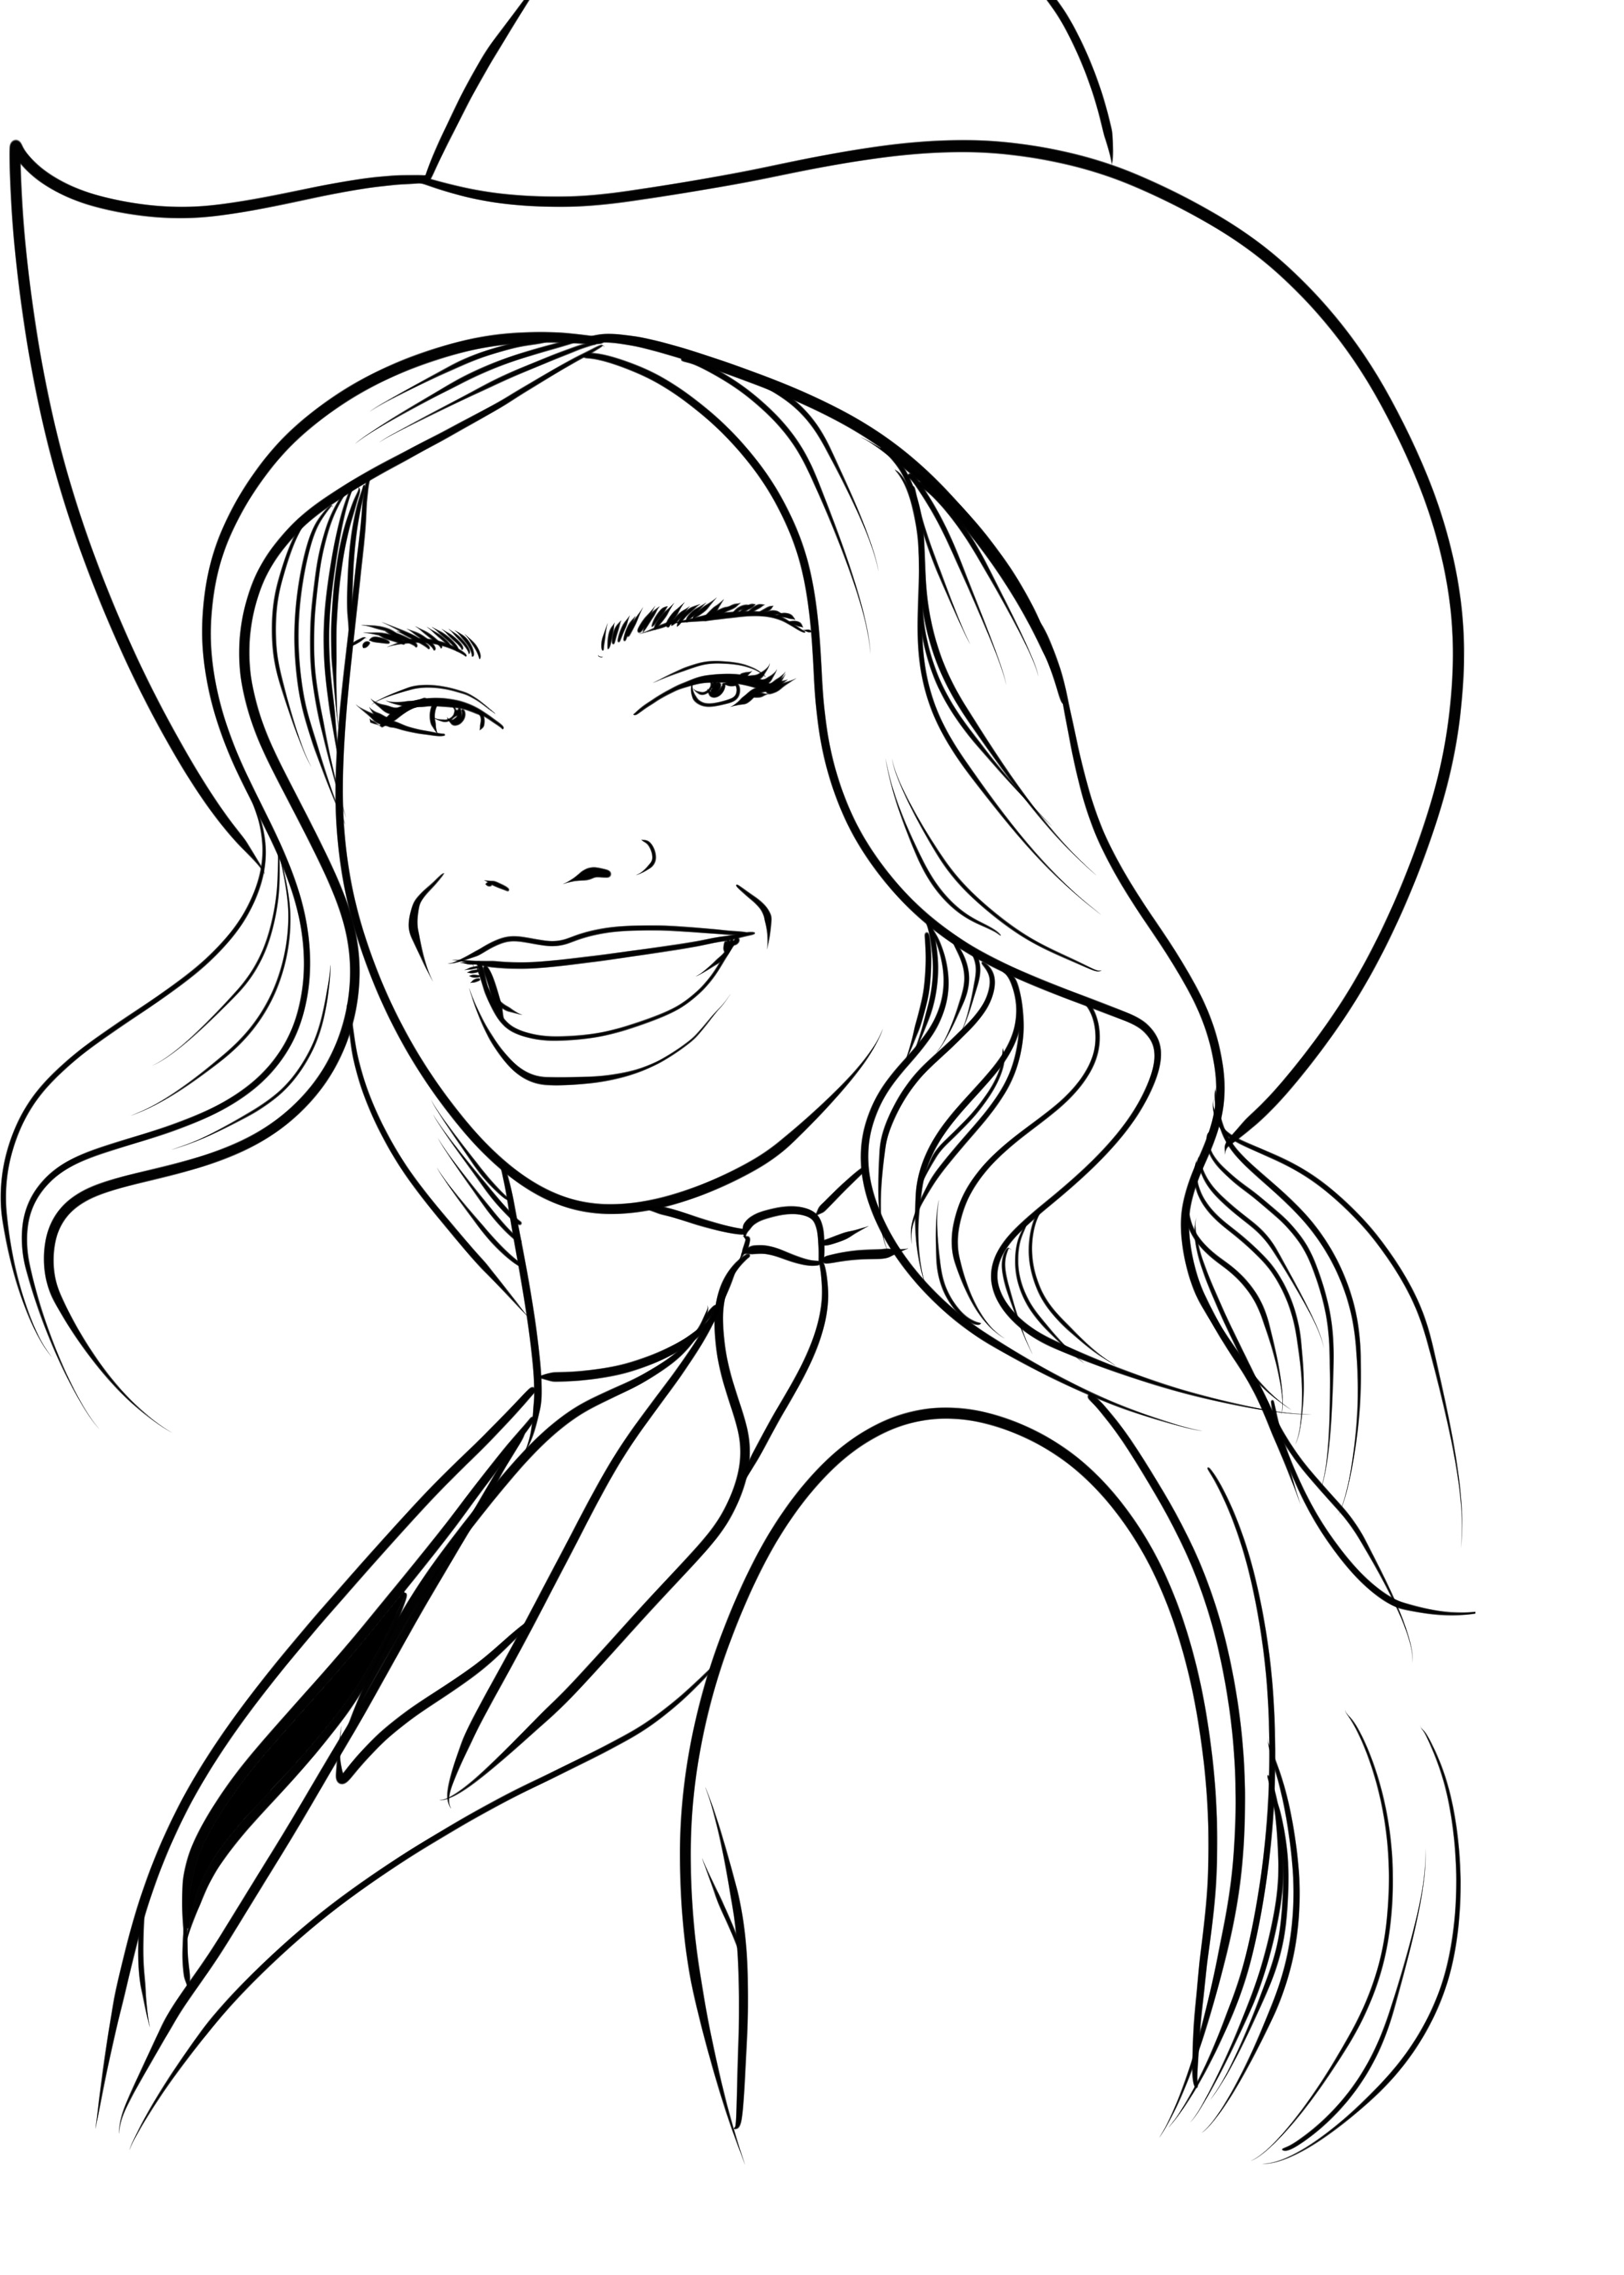 Barbie (Margot Robbie) 03 from Barbie coloring pages to print and coloring